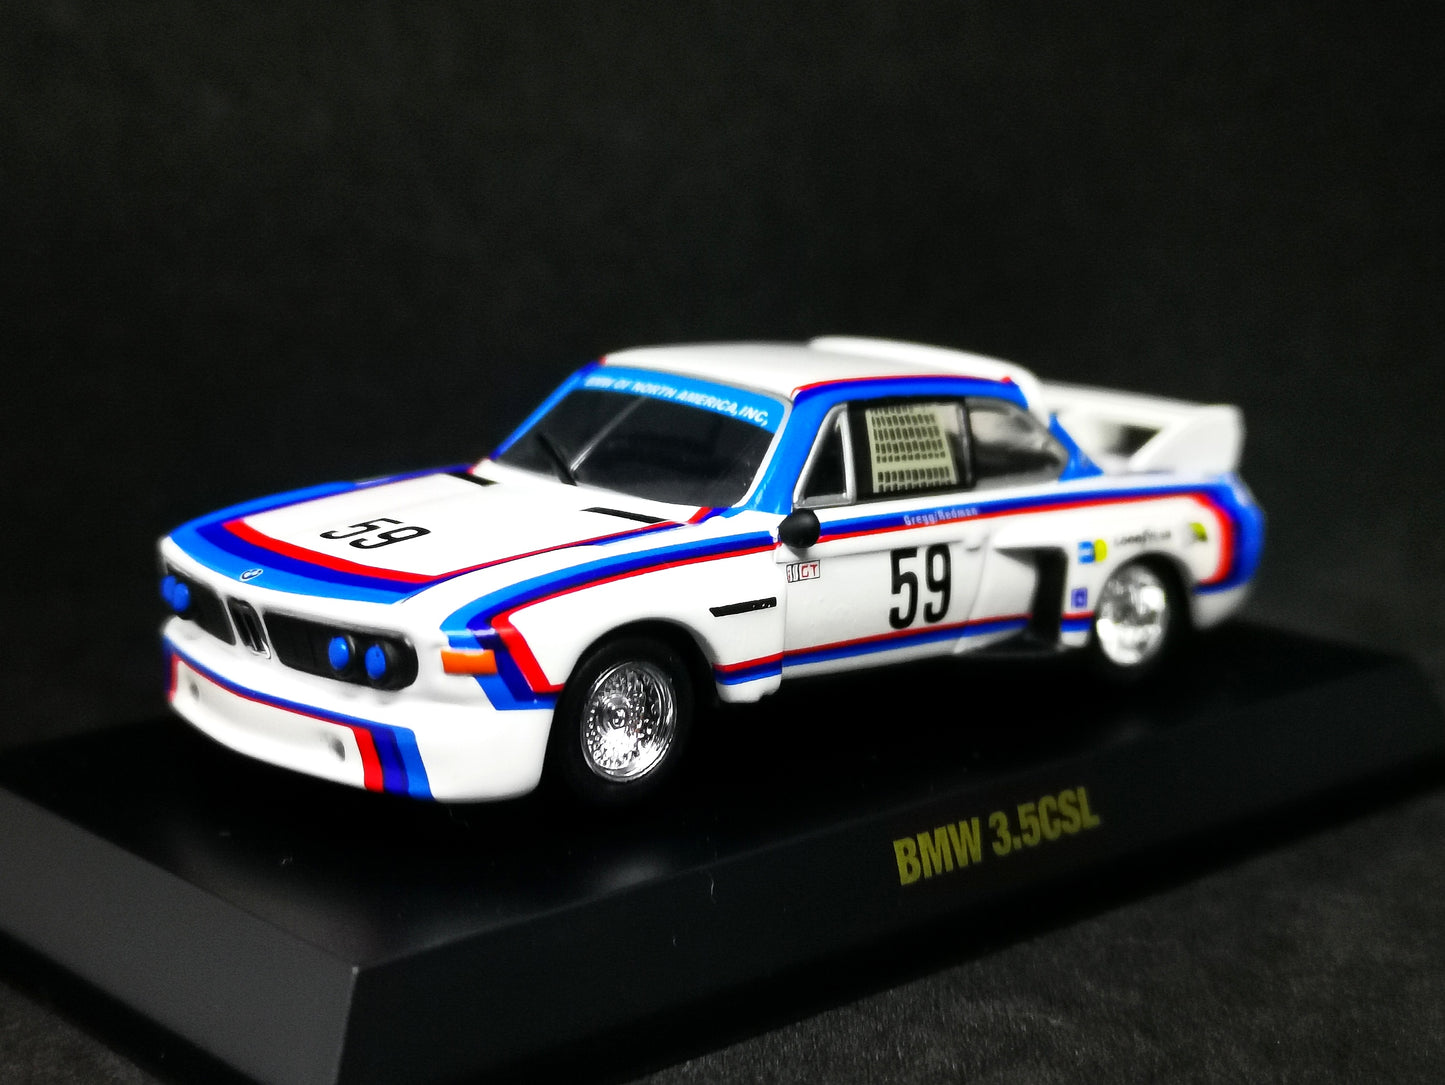 Kyosho 1:64 Scale Miniature Collection of BMW Automobiles BMW 3.5 CLS #59